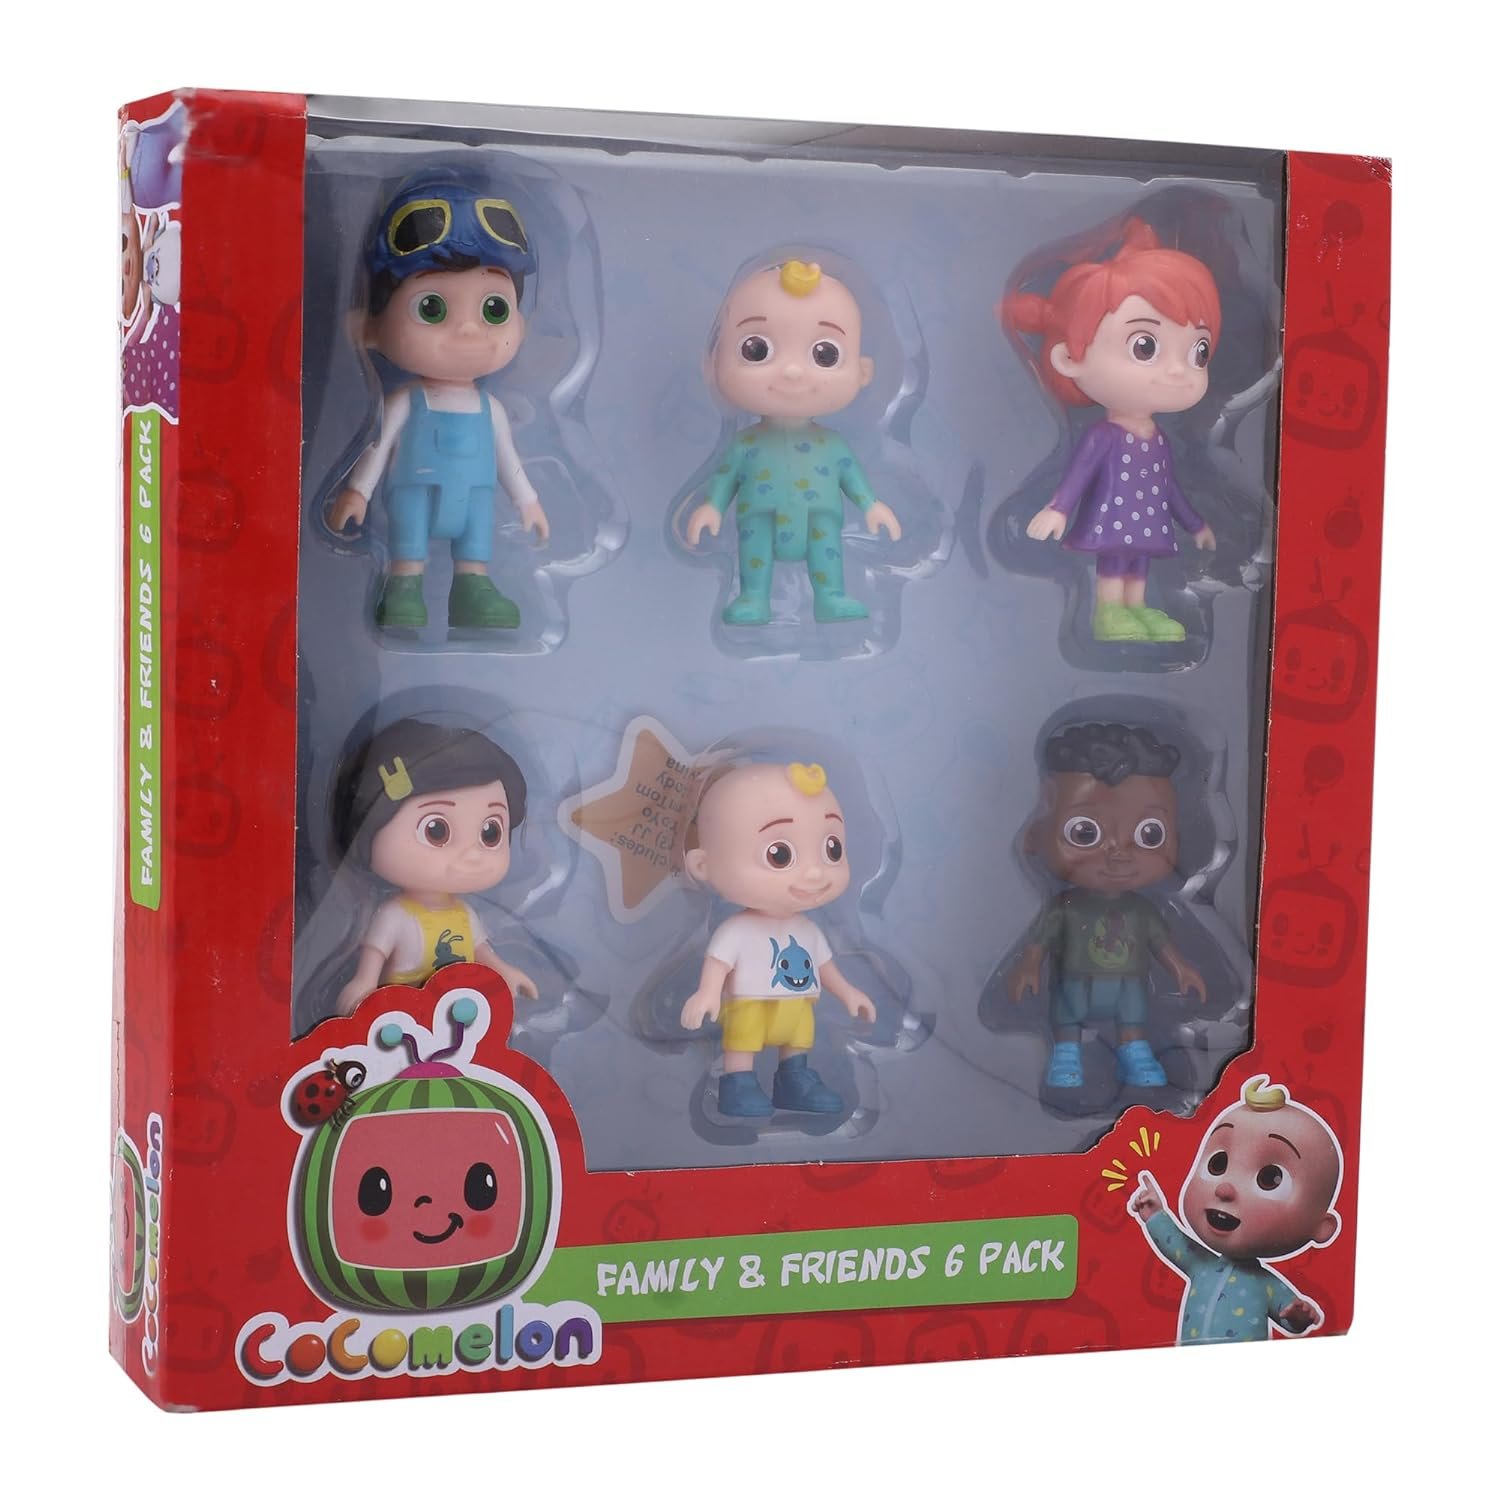 Cocomelon Playtime Figures